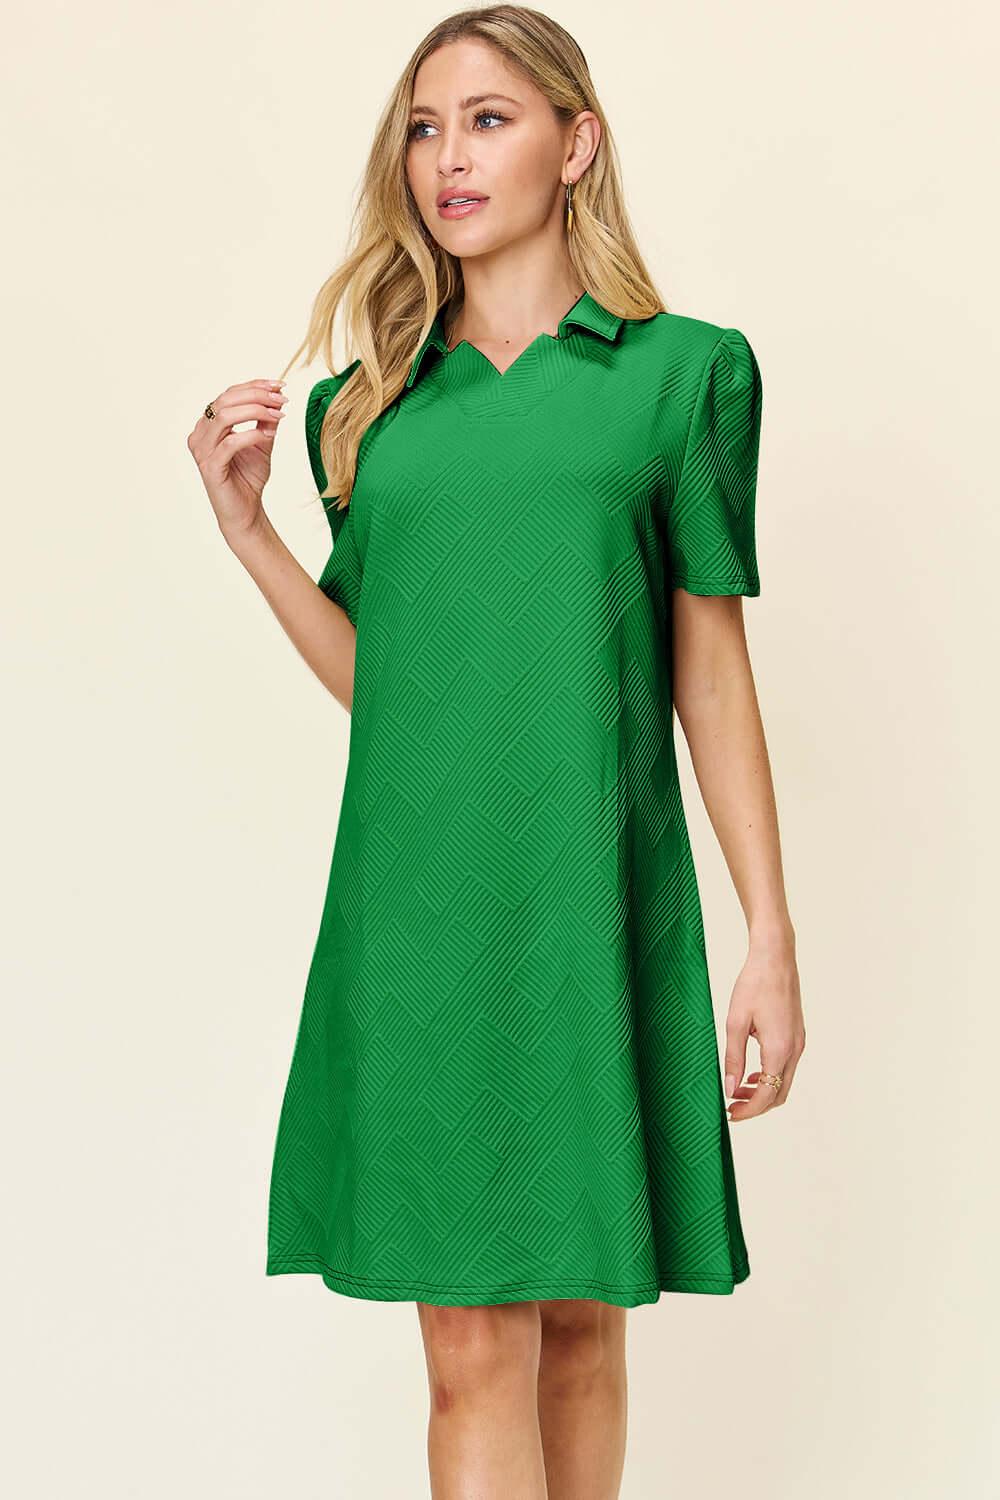 Double Take Full Size Texture Collared Neck Short Sleeve Dress - Samslivos